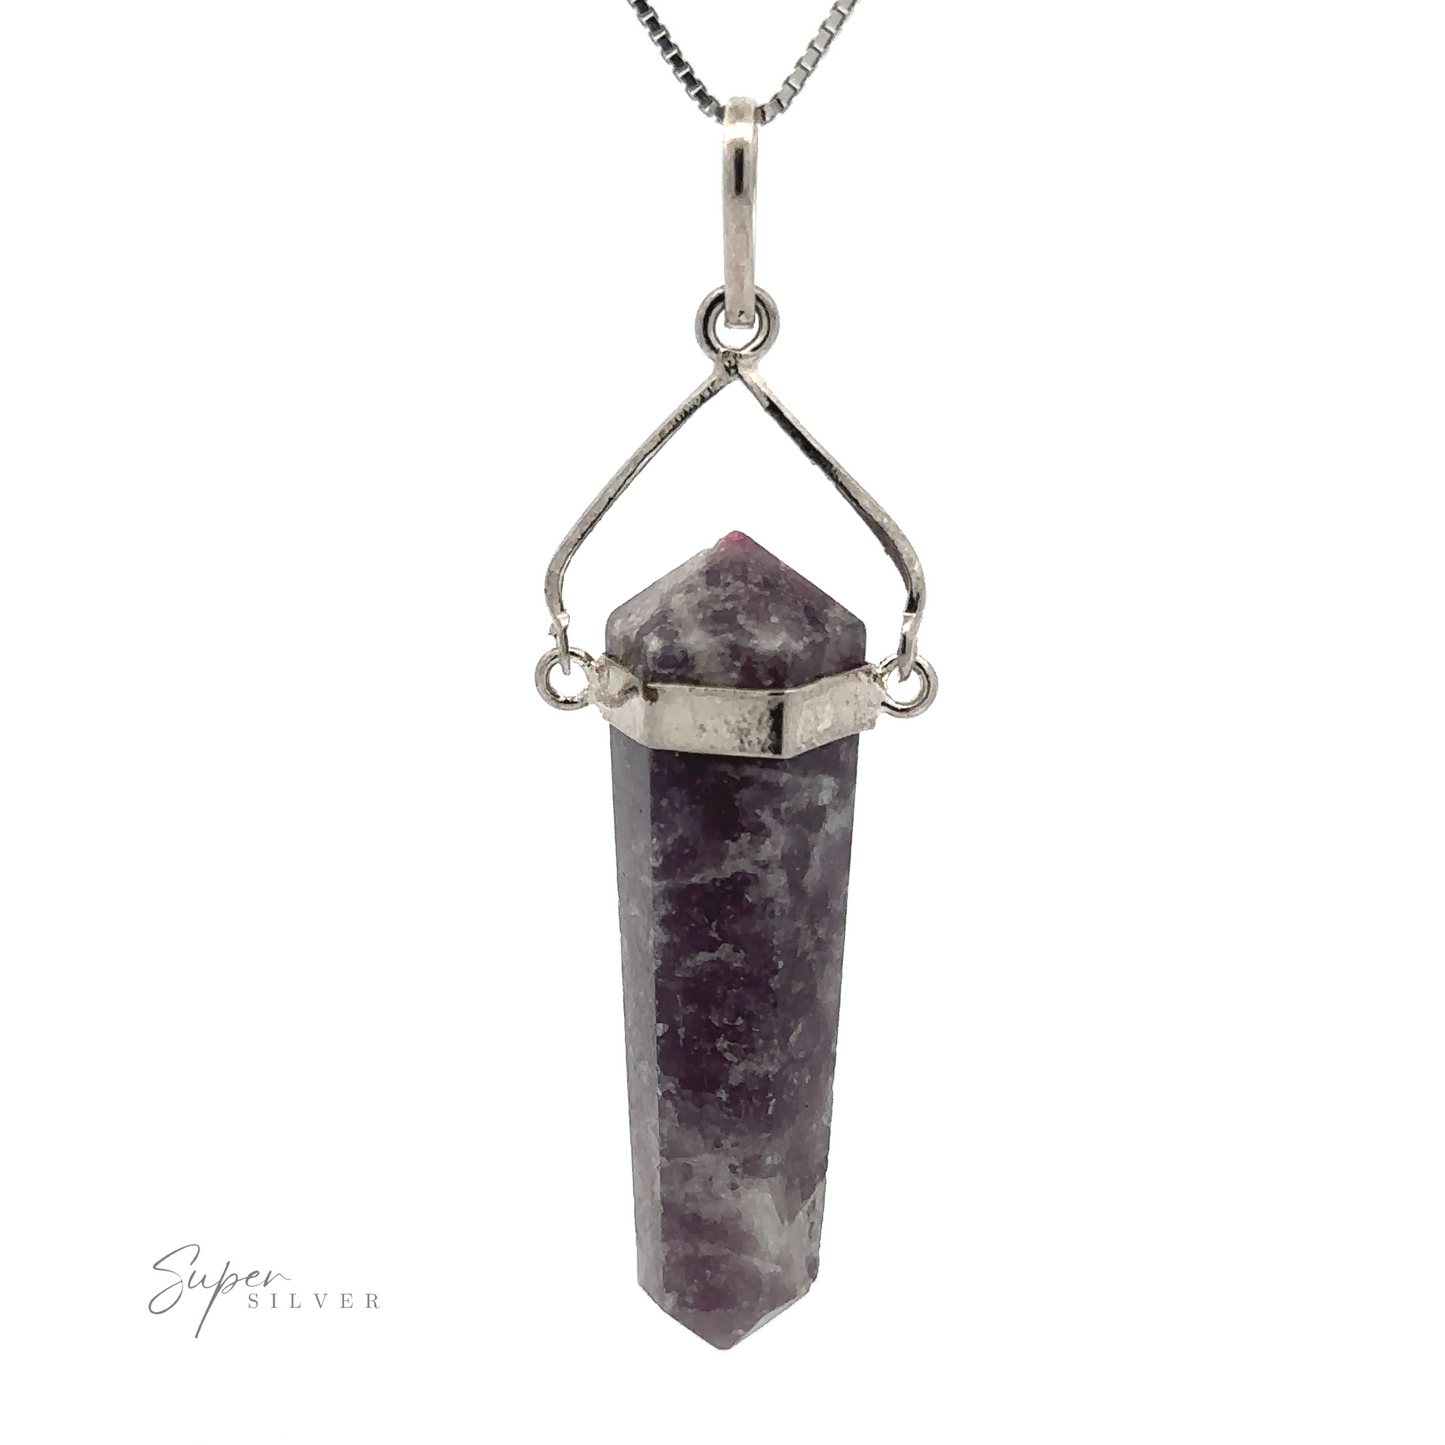 
                  
                    A Raw Stone Swivel Pendant with a hexagonal prism shape is elegantly mounted in a silver-plated setting. The pendant, resembling a raw stone obelisk, hangs from a delicate silver chain.
                  
                